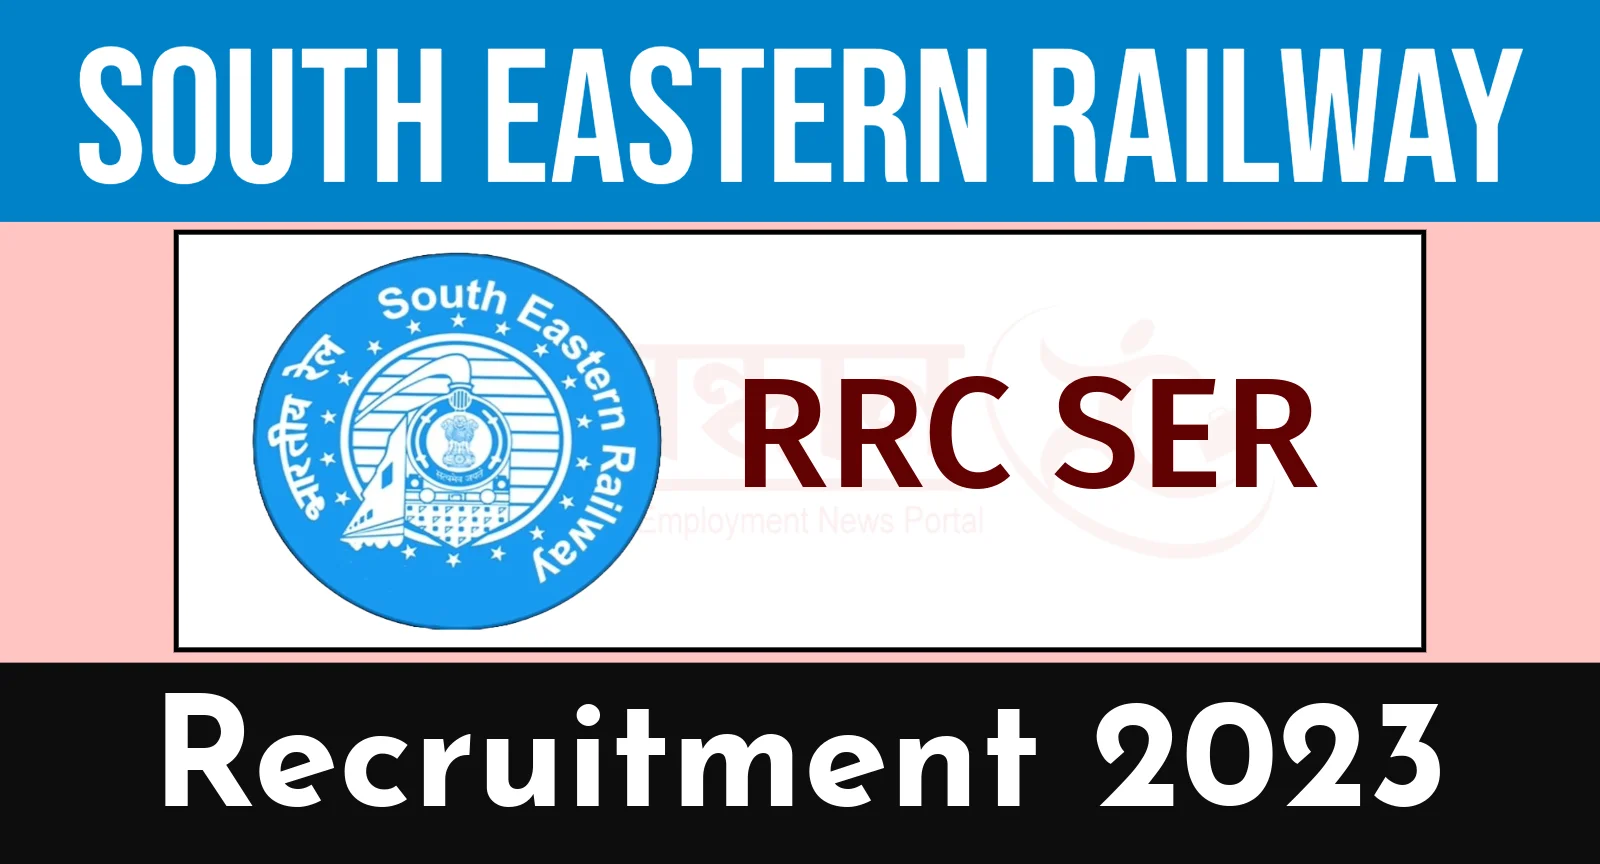 Eastern Railway Recruitment 2020 Out - Apply Online 2792 Act Apprentice Jobs